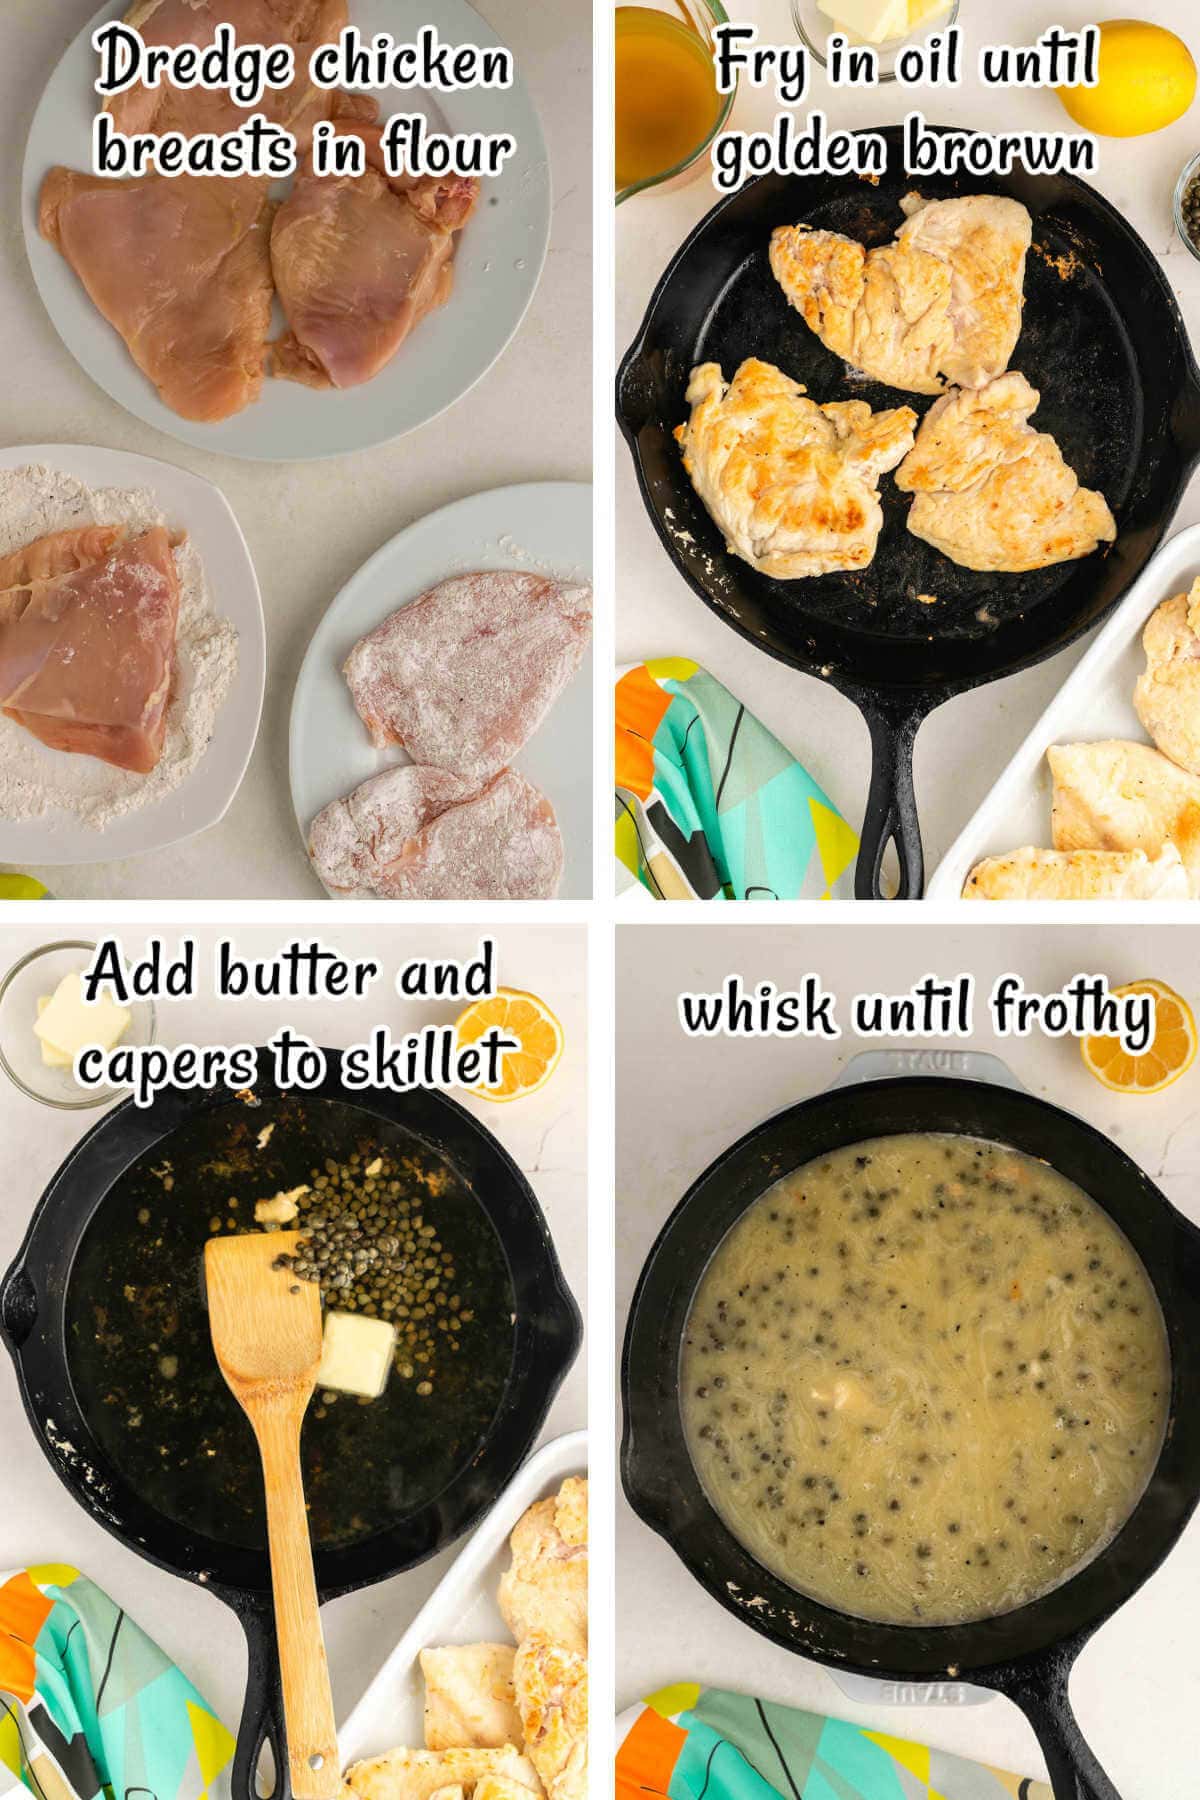 Step-by-step instructions to make the chicken recipe. With print overlay for clarification.